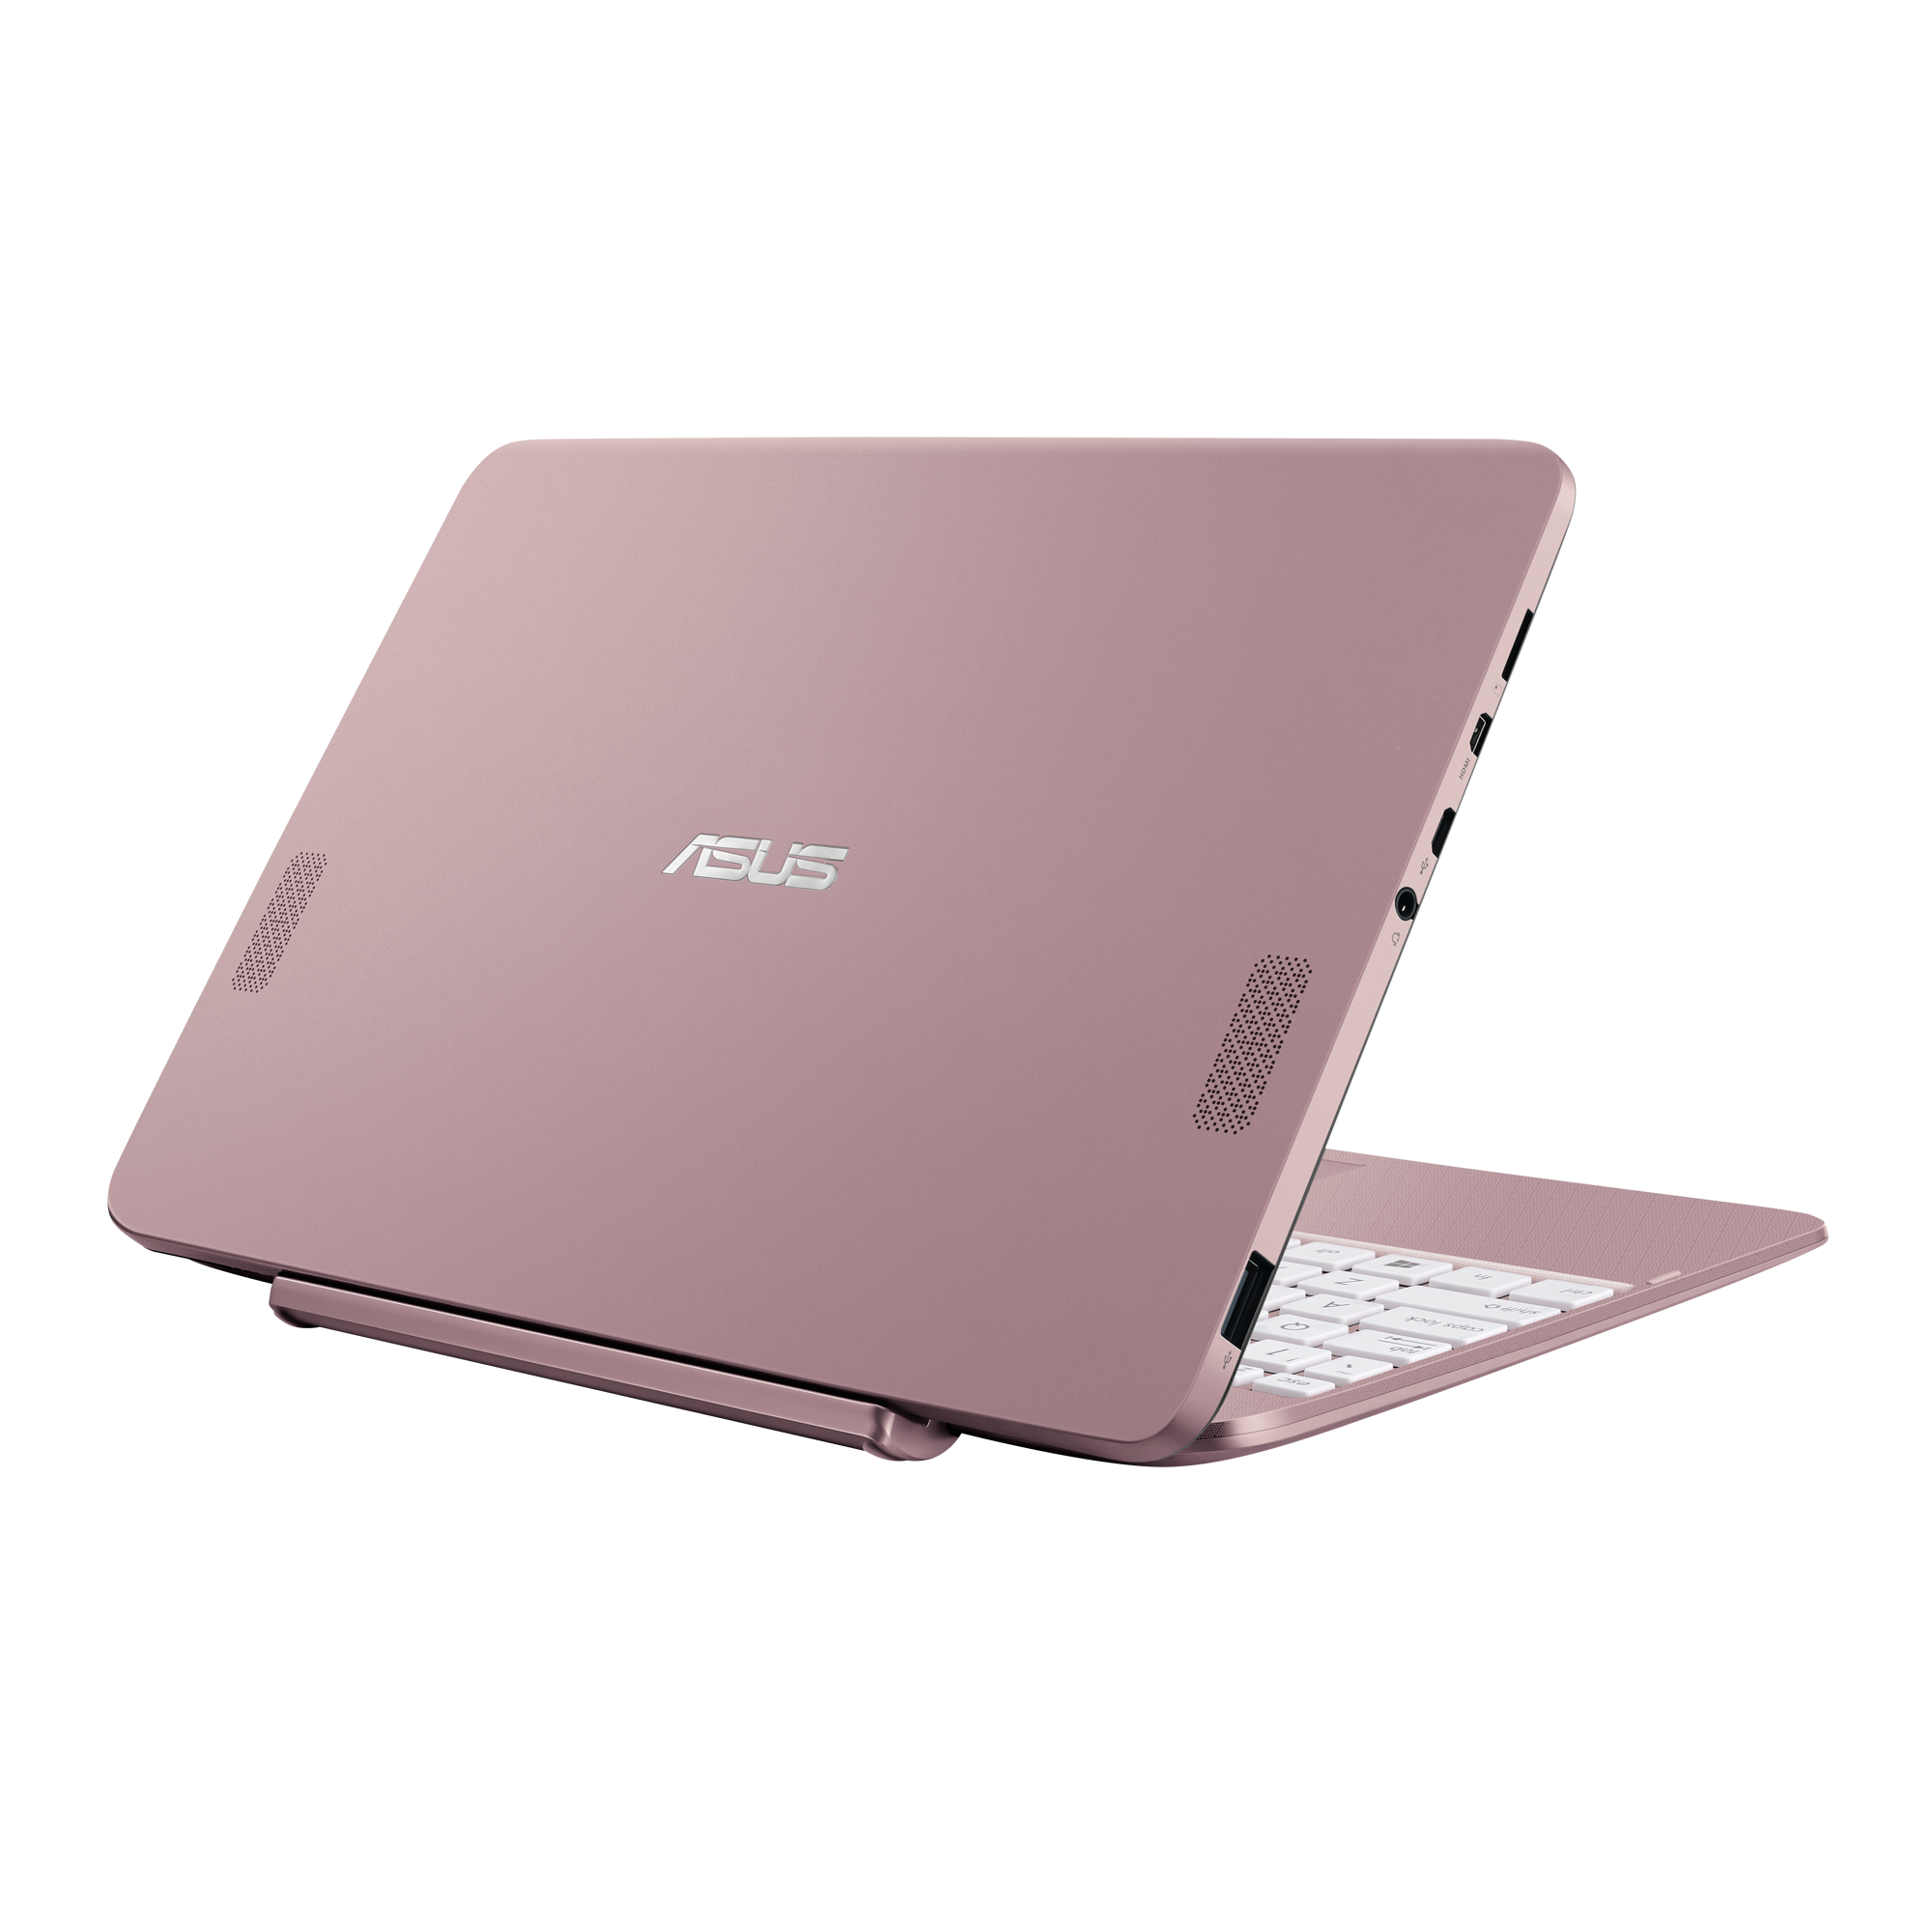 ASUS Transformer Book T101｜Laptops For Home｜ASUS USA